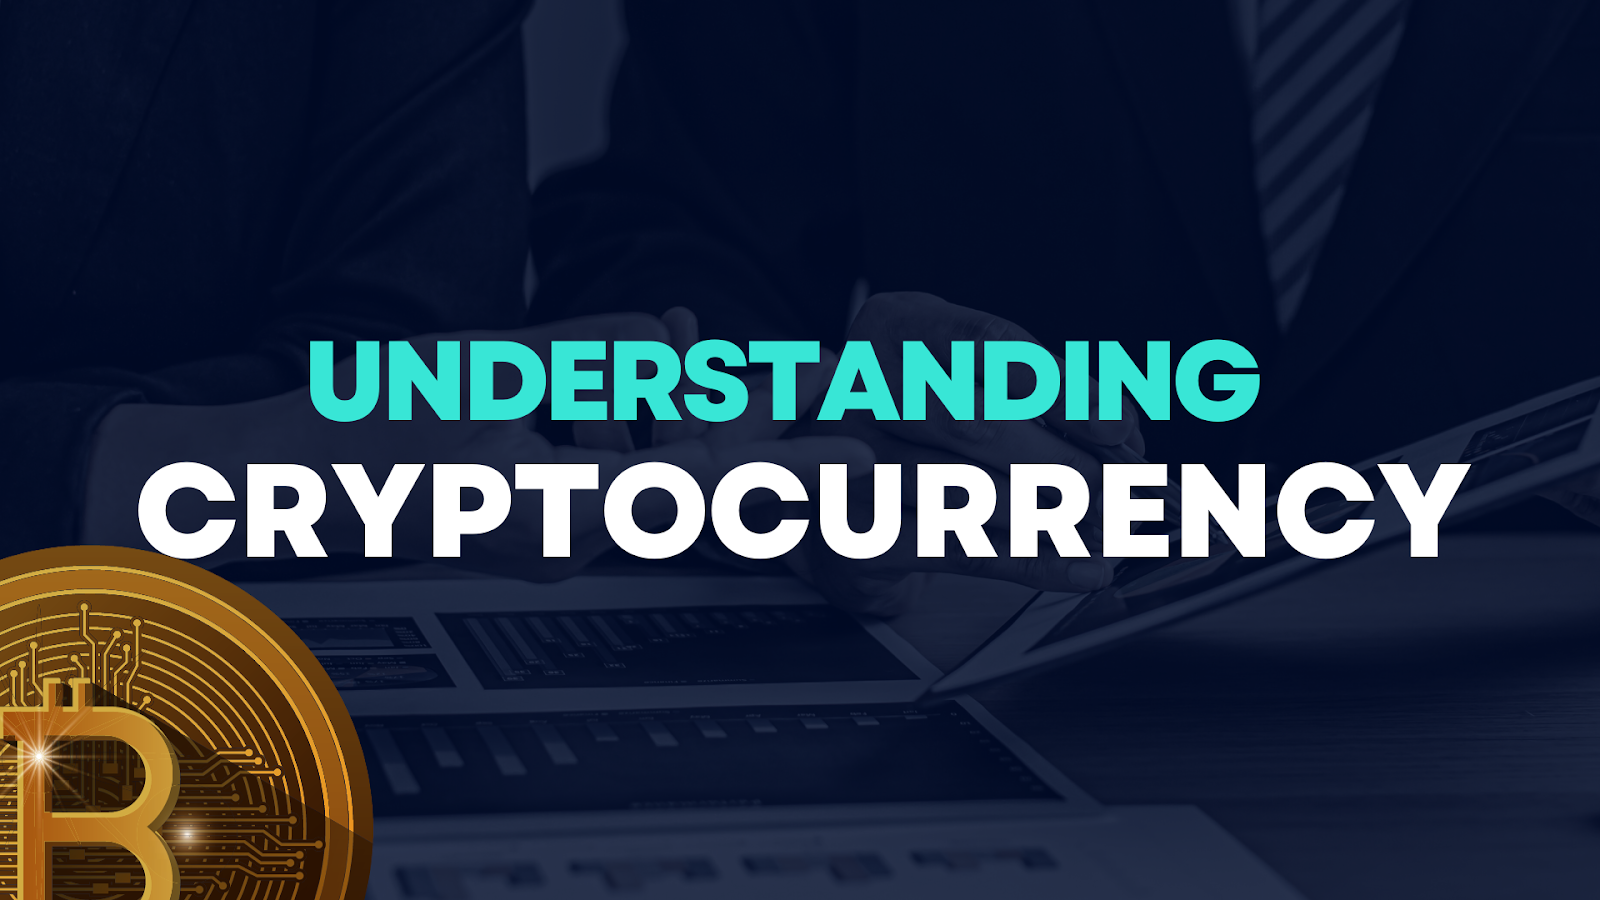 WHAT EXACTLY IS CRYPTOCURRENCY